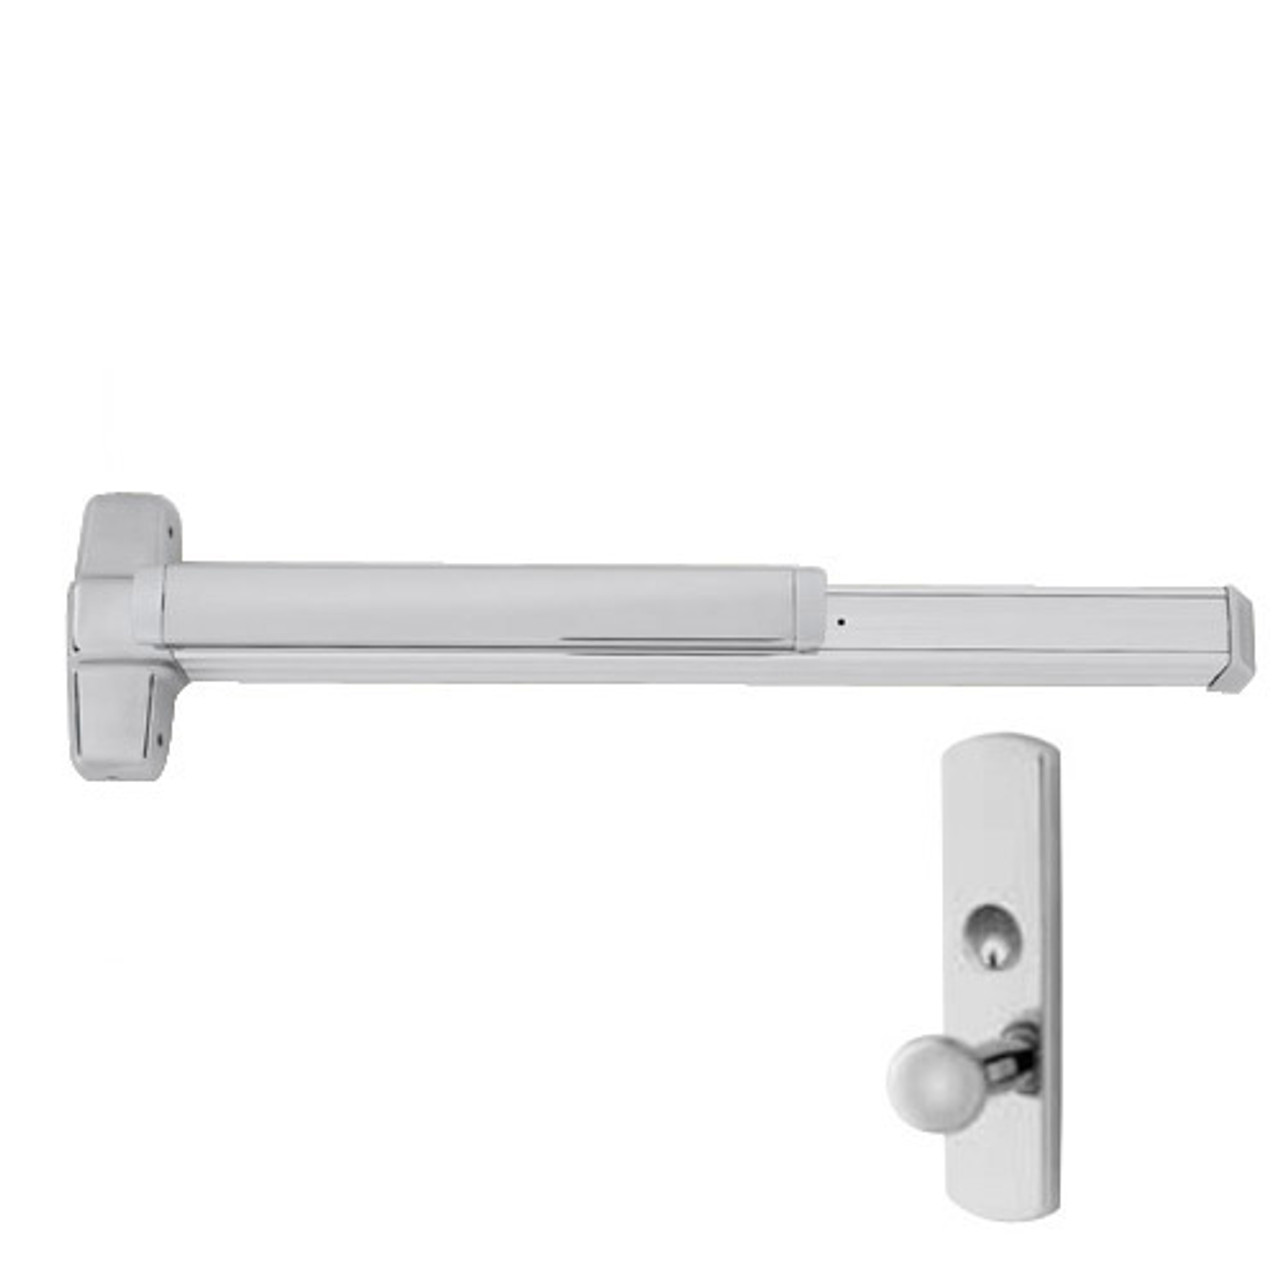 EL9847WDC-K-US32D-4 Von Duprin Exit Device with Electric Latch Retraction in Satin Stainless